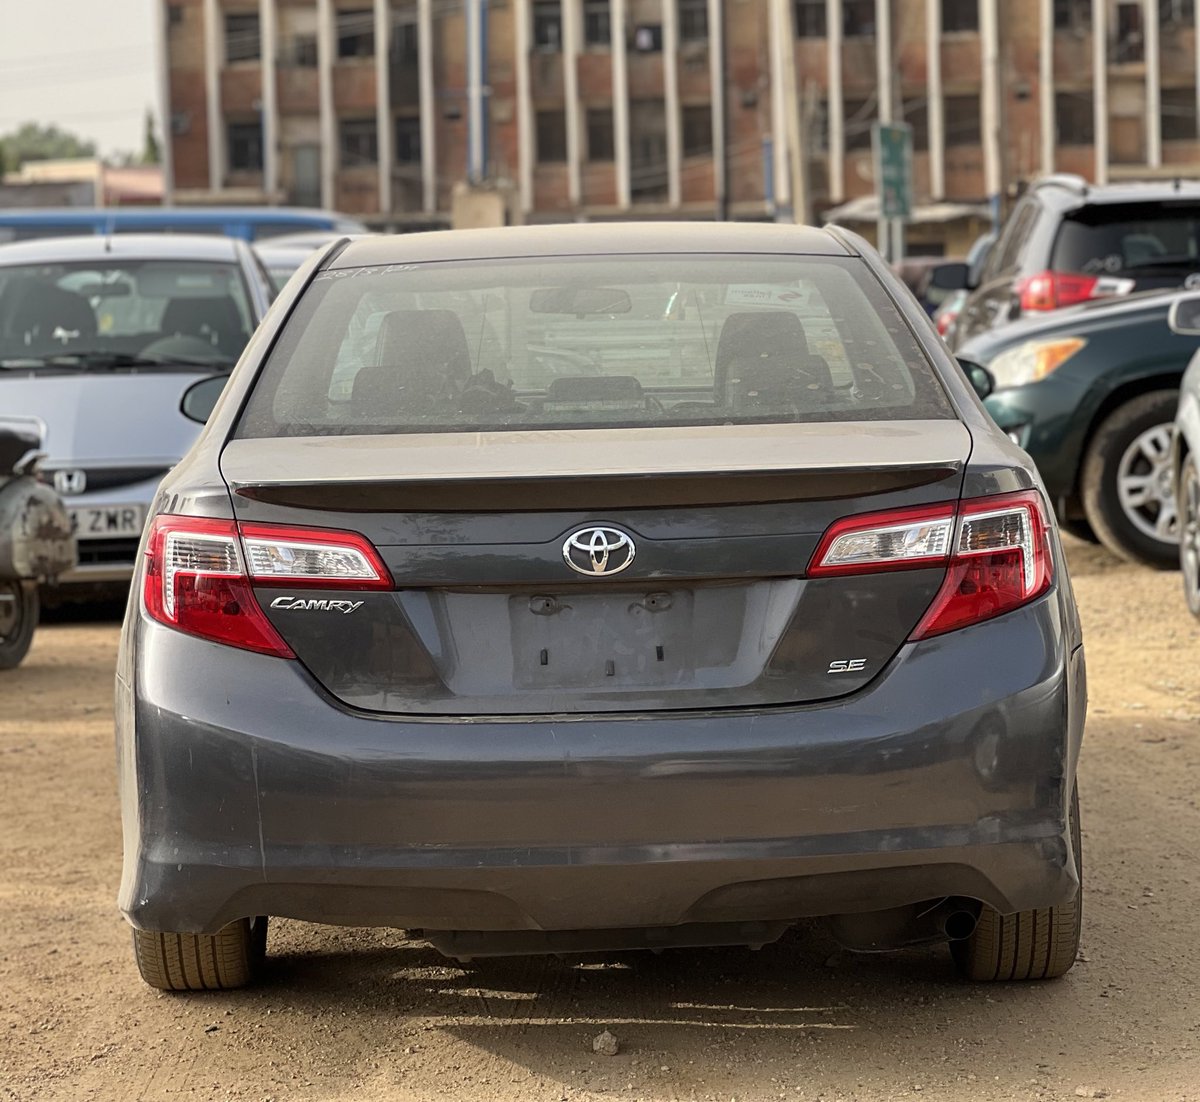 Buy & fix‼️2012 TOYOTA CAMRY WITH ORIGINAL DUTY AVAILABLE AT KANOCAR LTD #kanocar